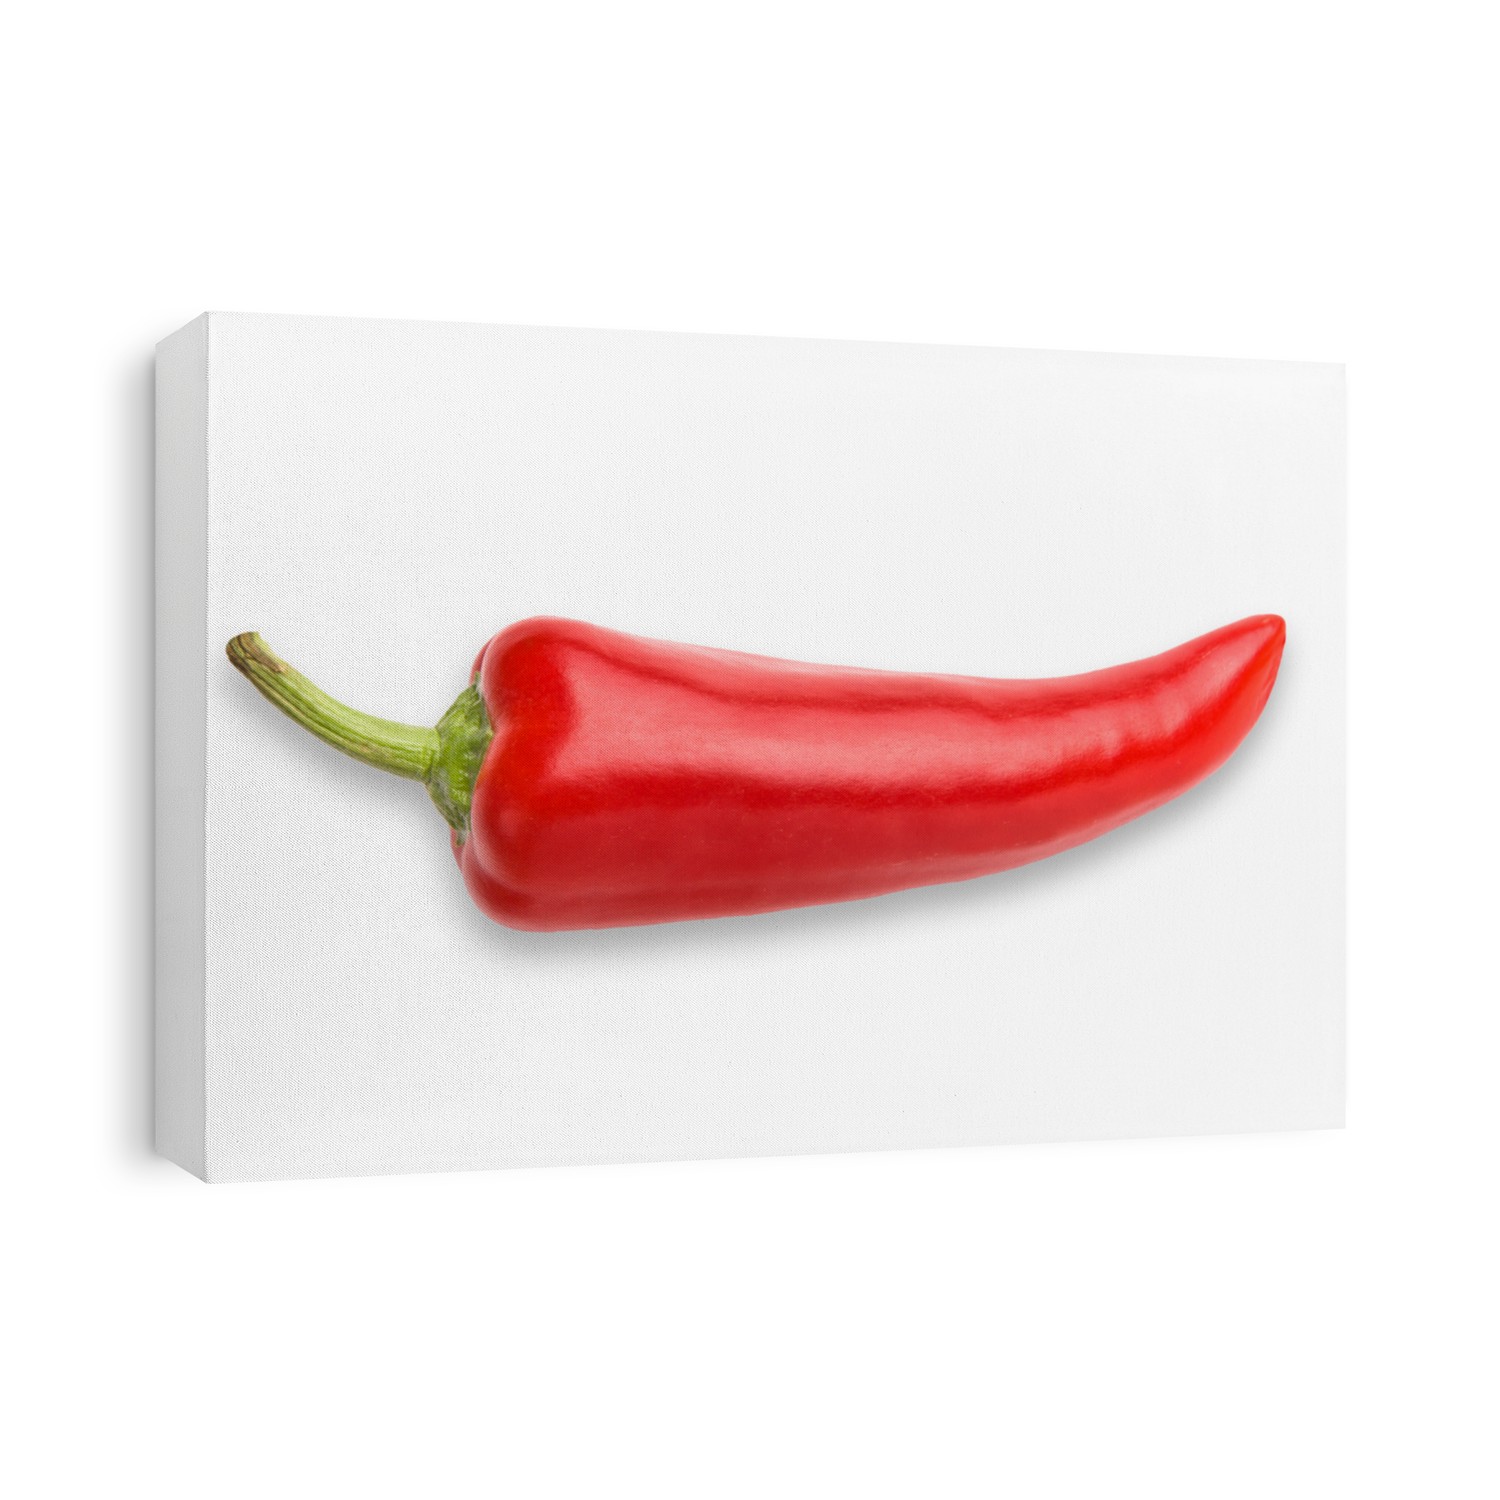 Red Chili Pepper on white (includes clipping path)